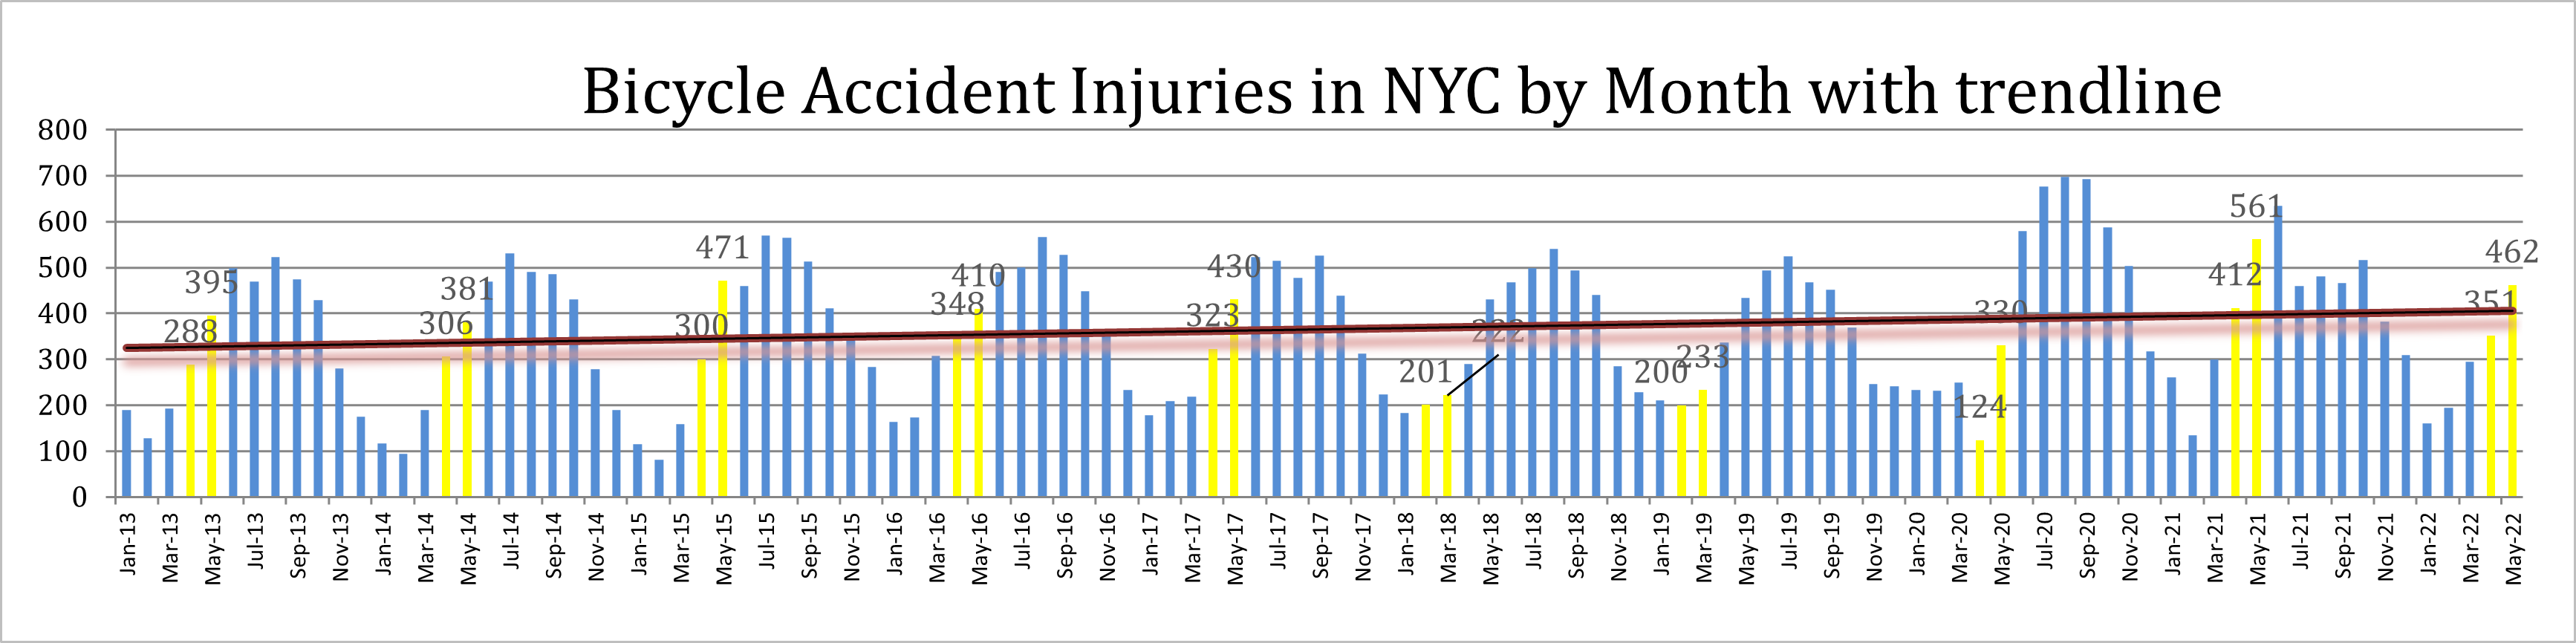 Bicycle Acccident Injuries NYC by Month With Trendline